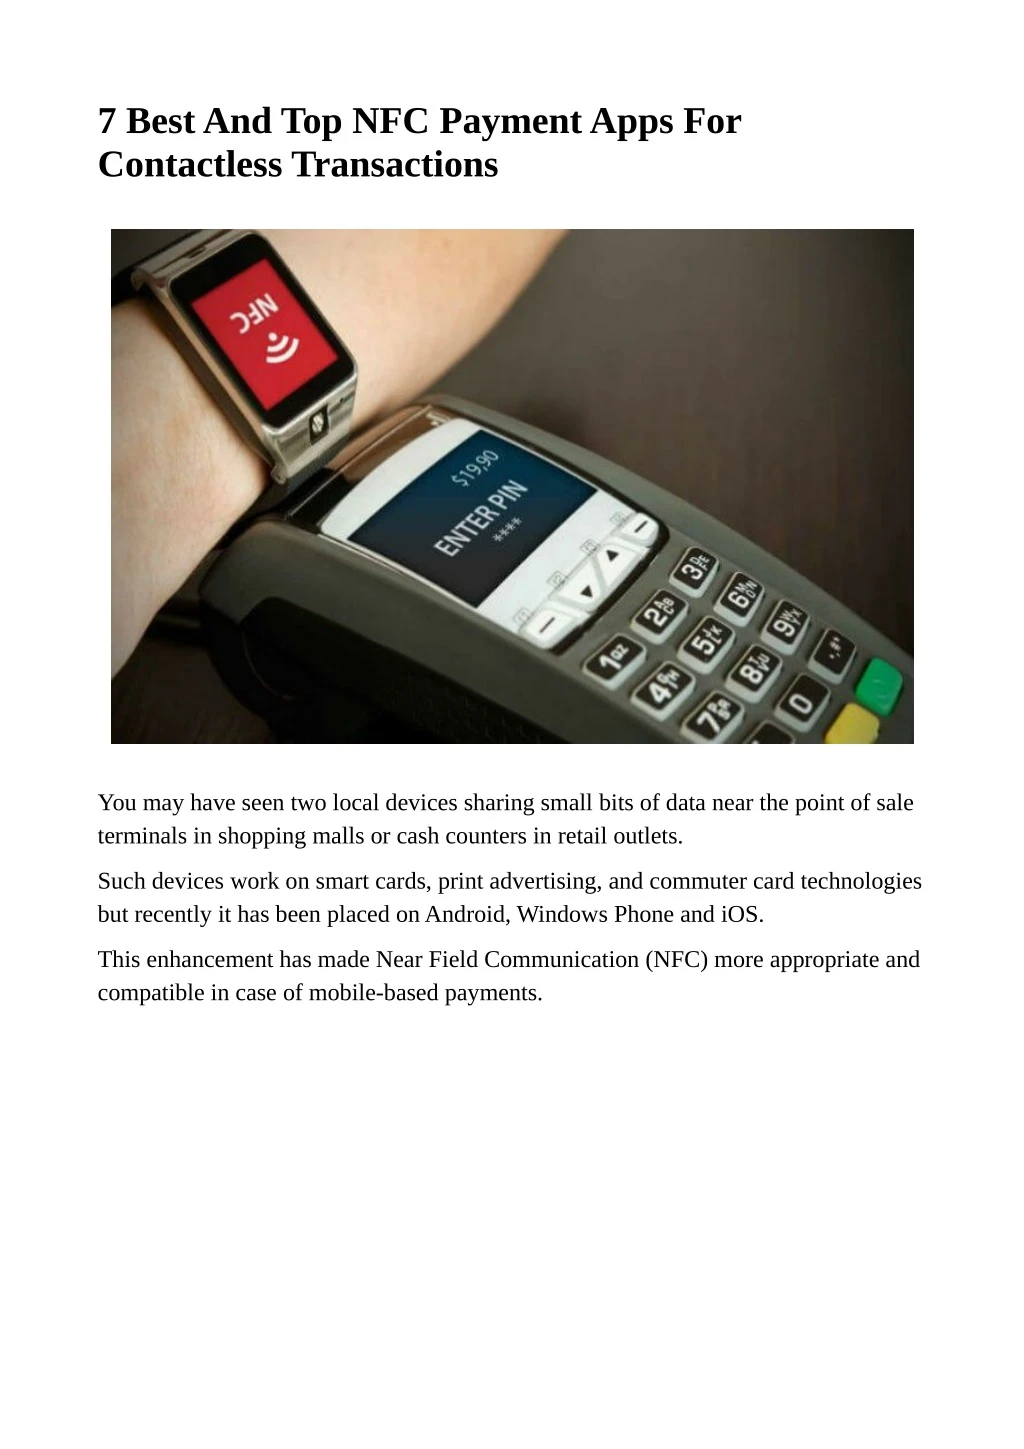 7 best and top nfc payment apps for contactless